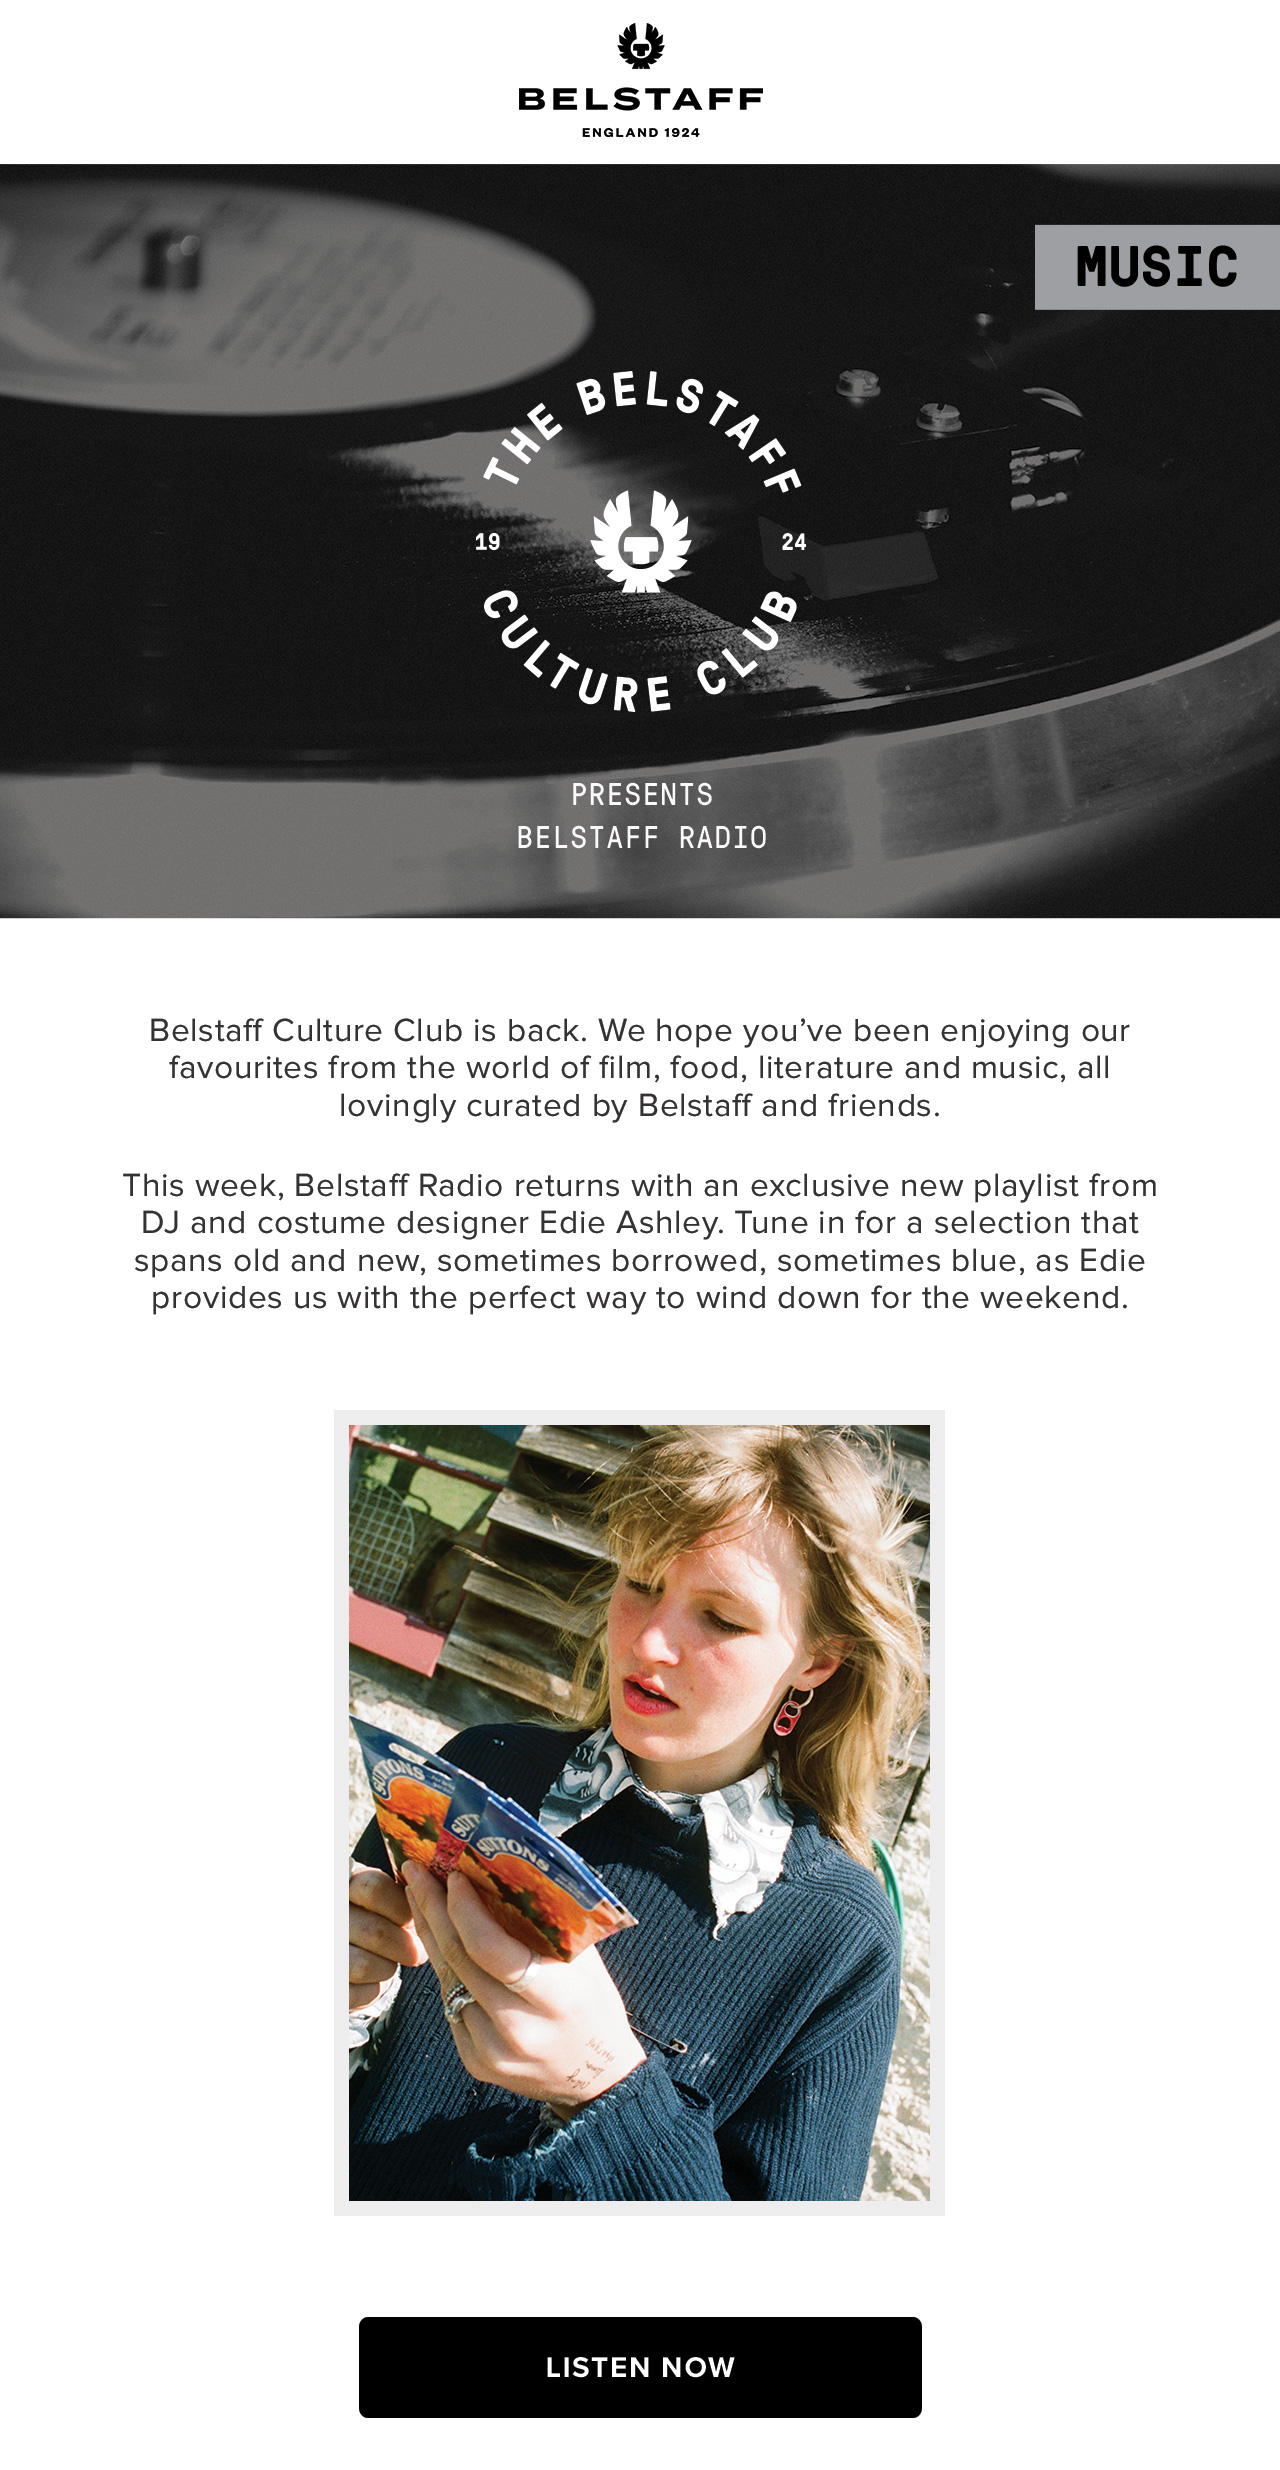 Welcome to the Belstaff Culture Club: our vibrant weekly calendar of content based on film, music, books, food and drink.